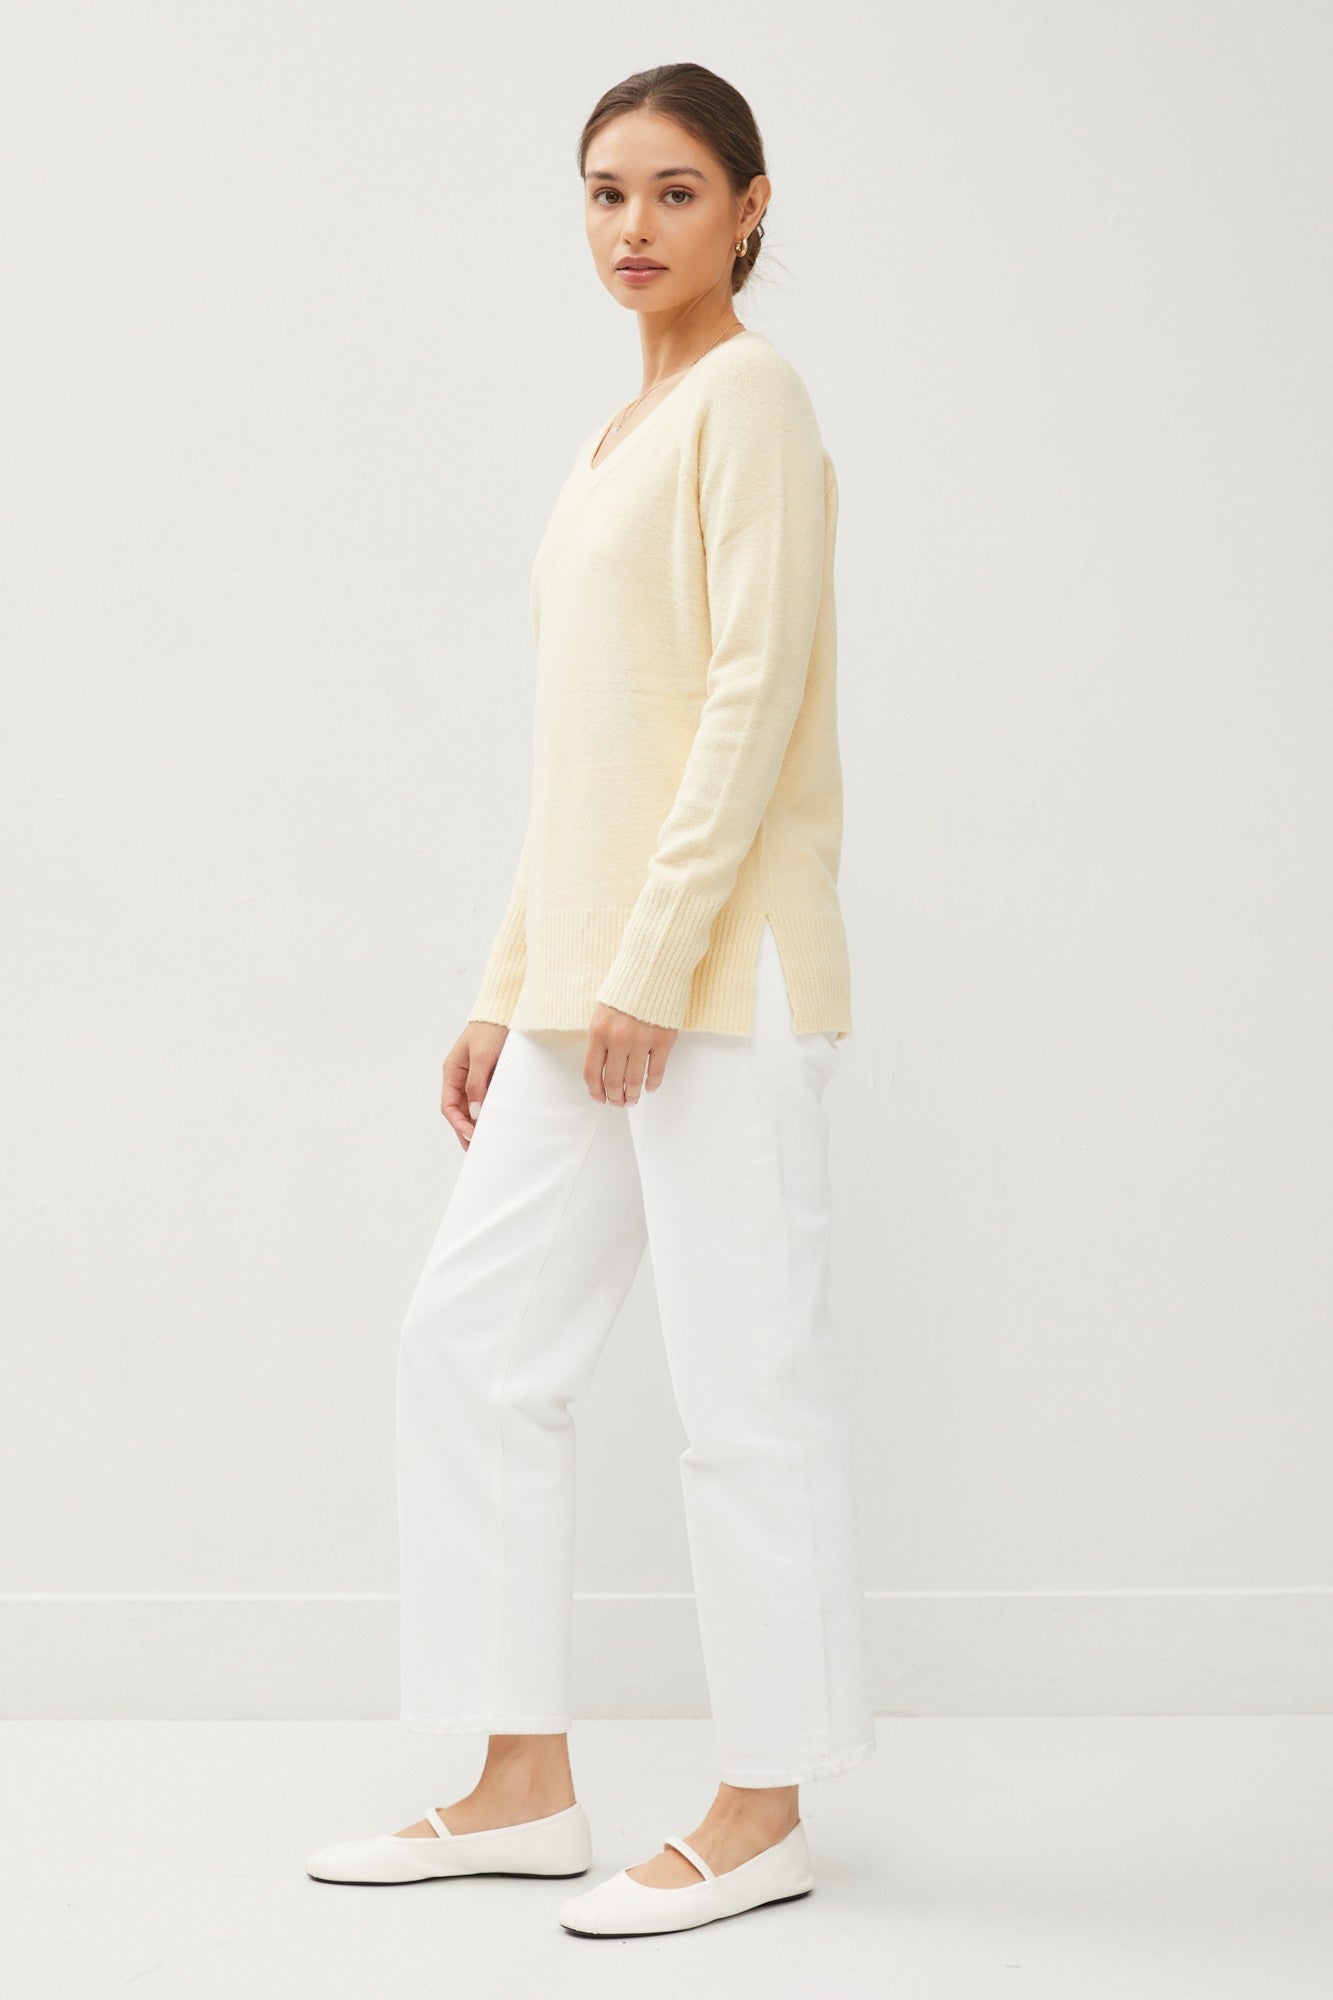 Everlee Classic V-Neck Sweater full outfit profile